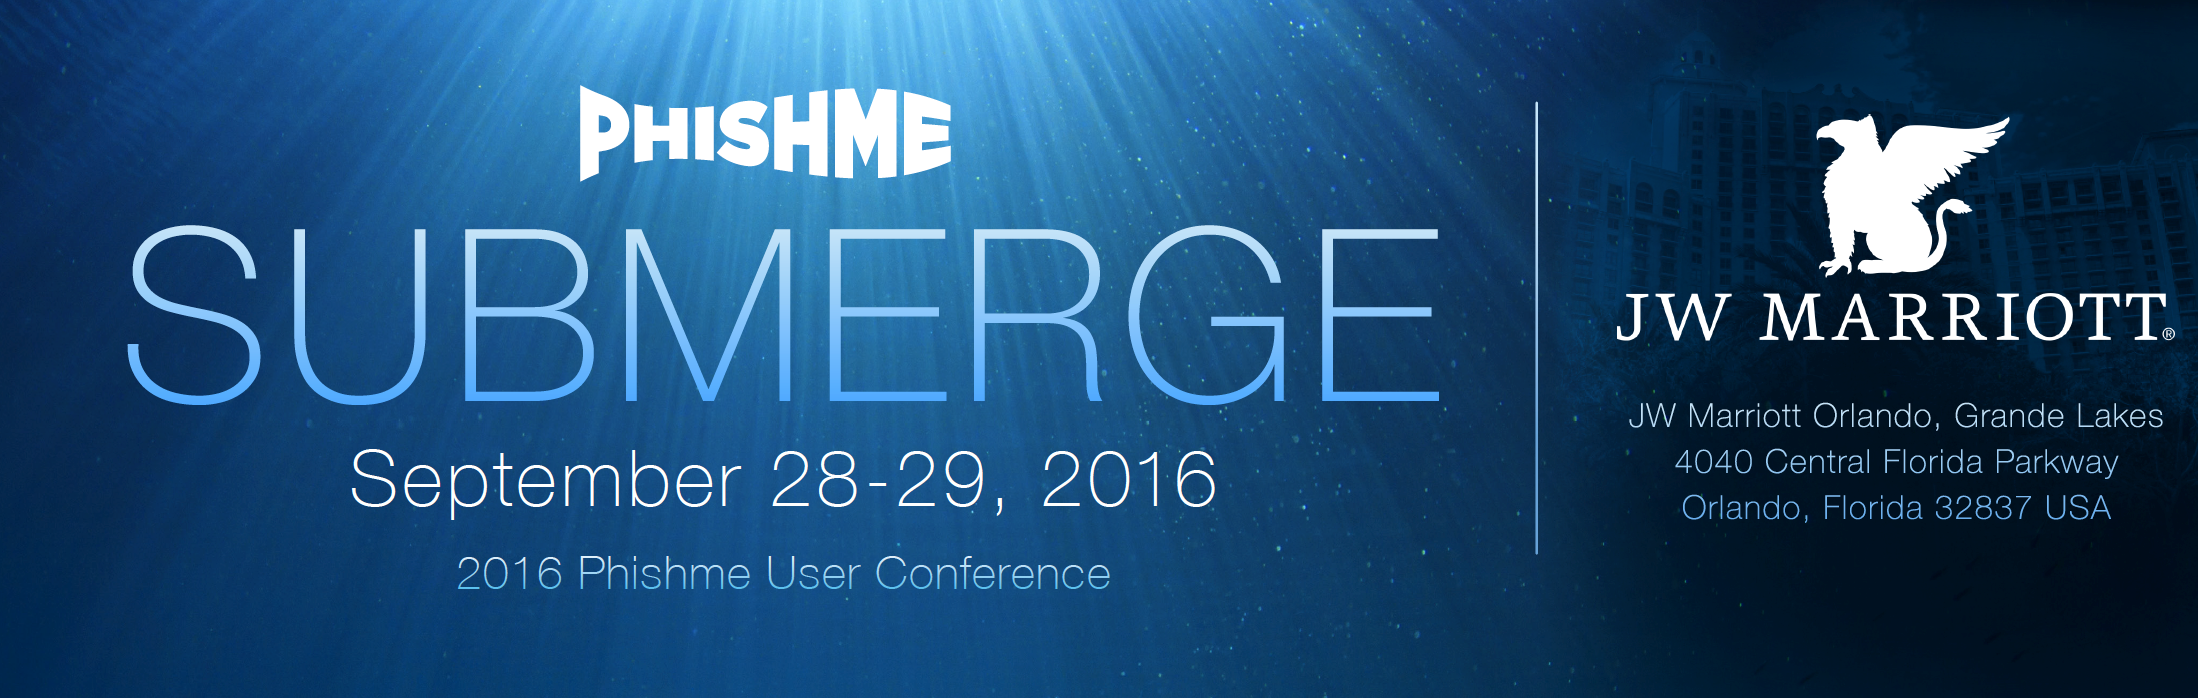 Submerge call for speakers blog graphic